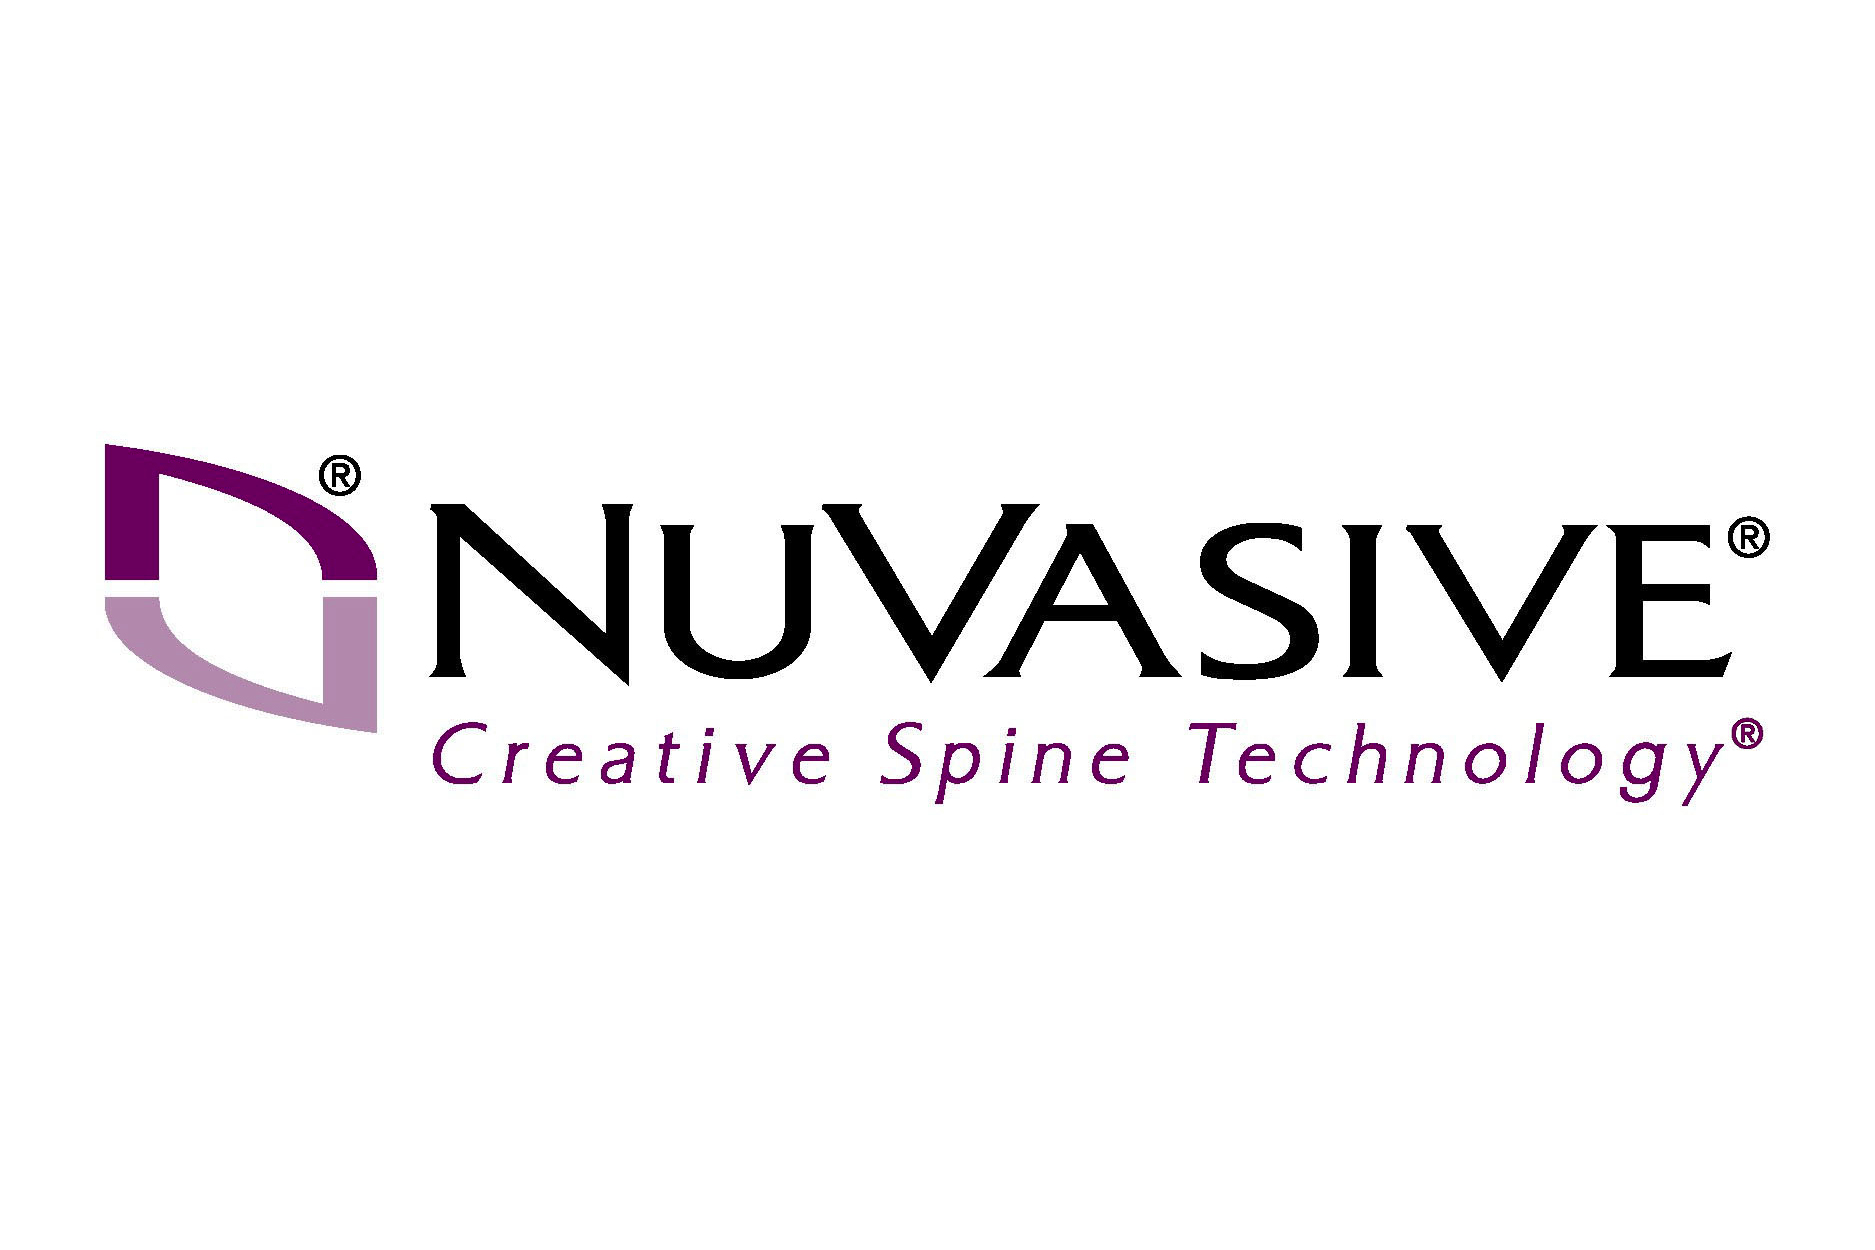 NuVasive swings to Q2 red as it reveals OIG probe